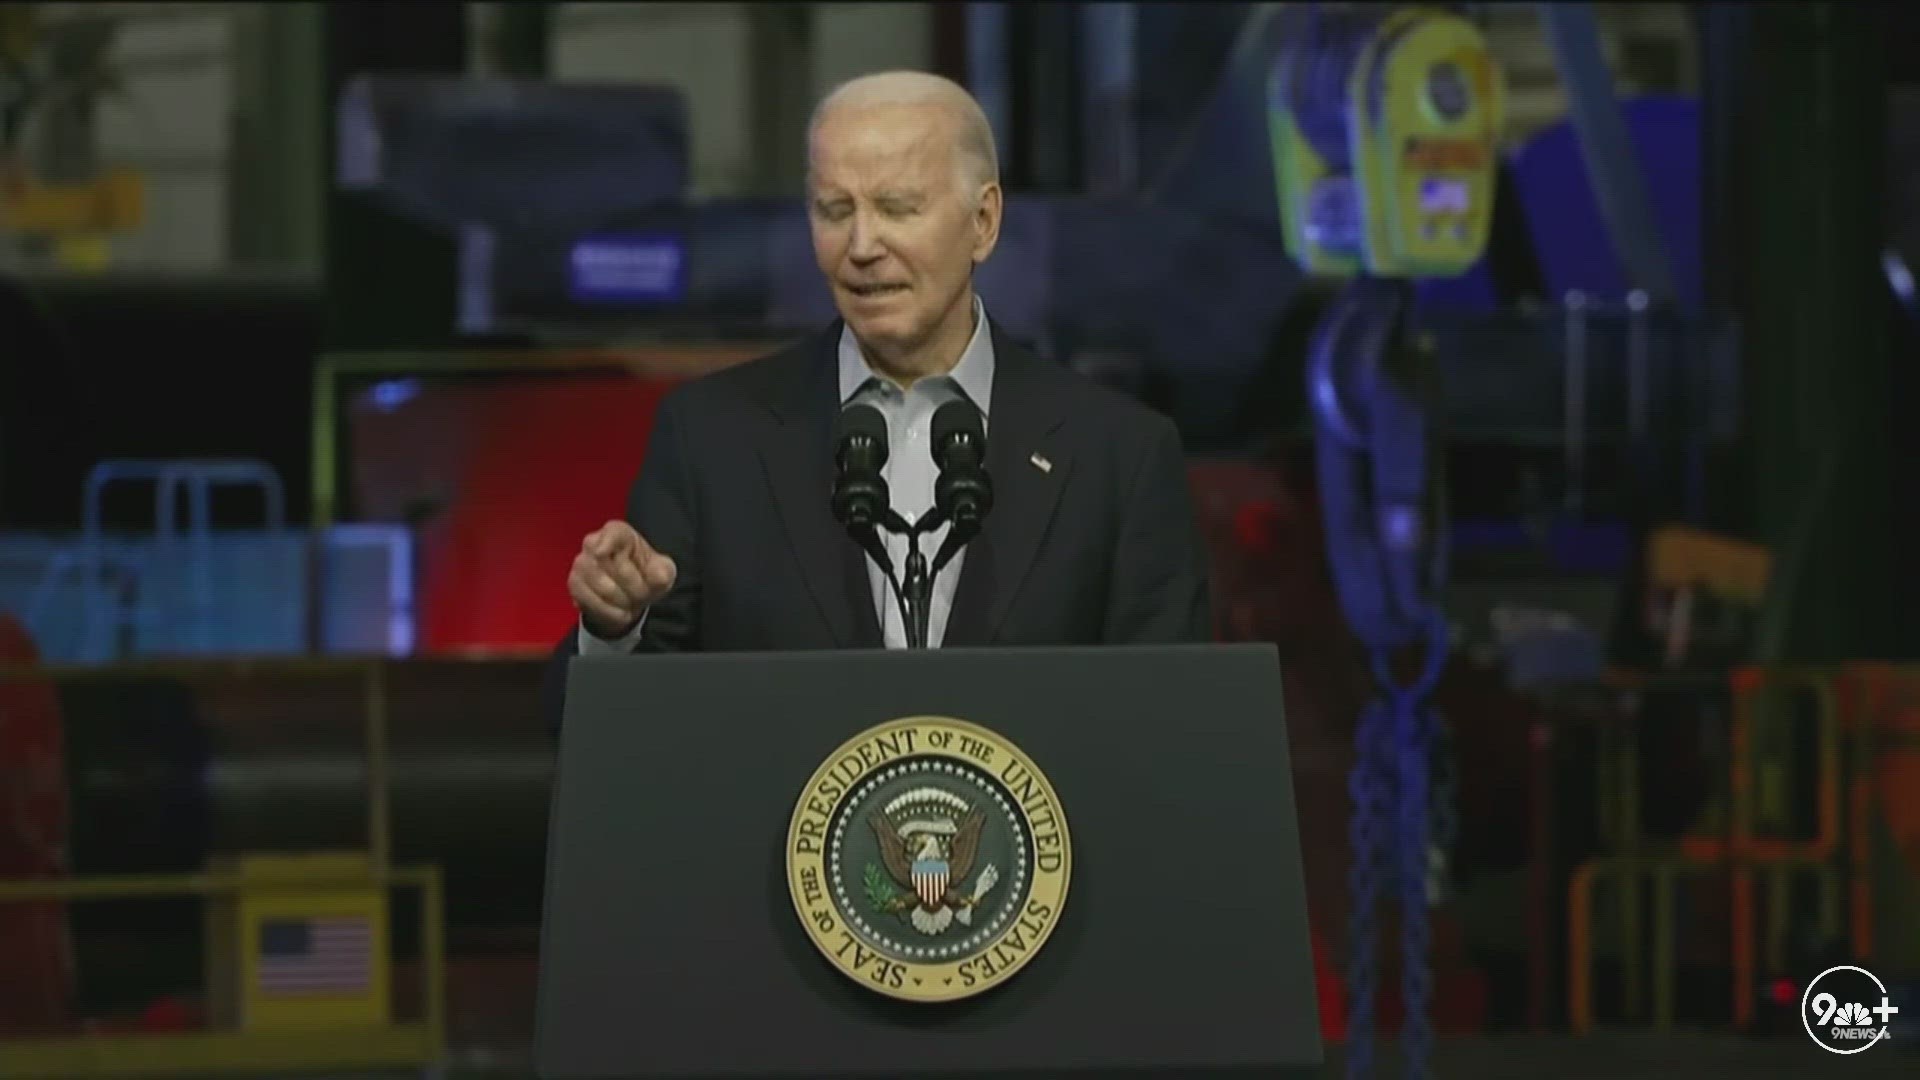 In his fifth visit to the state since taking office, President Joe Biden visited the CS Wind plant in Pueblo.